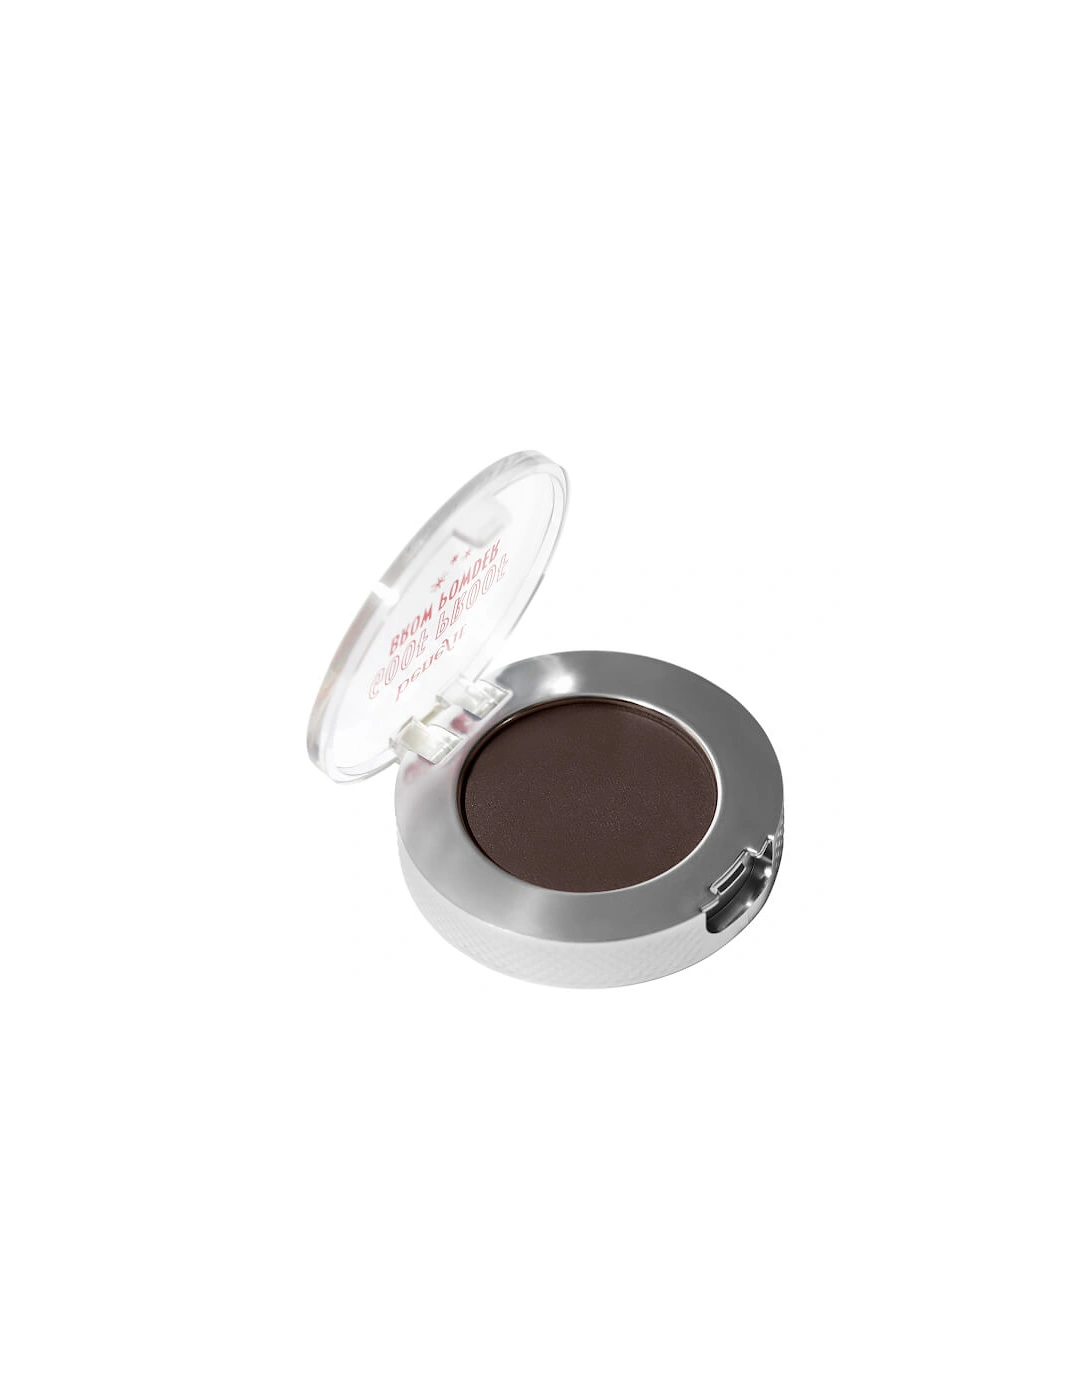 Goof Proof Easy Brow Filling Powder - 05 Warm Black-Brown, 2 of 1